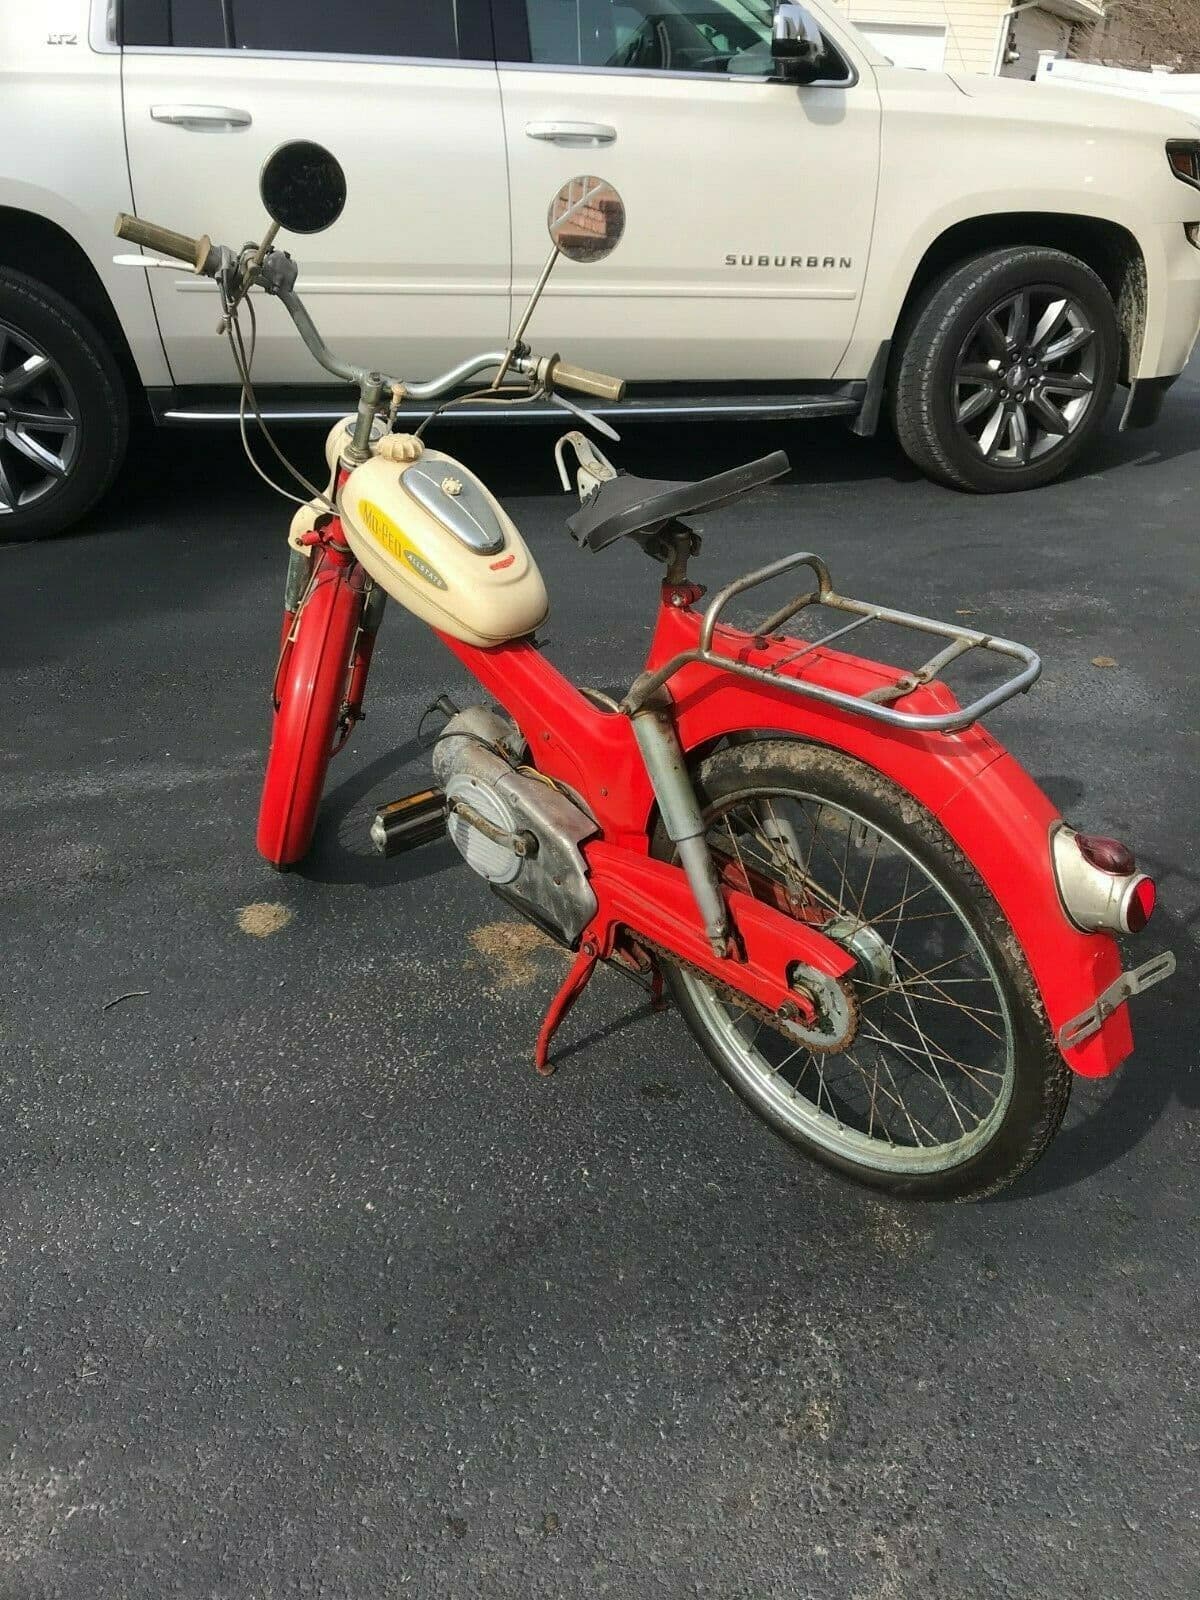 810.94011 Allstate Mo-Ped Puch